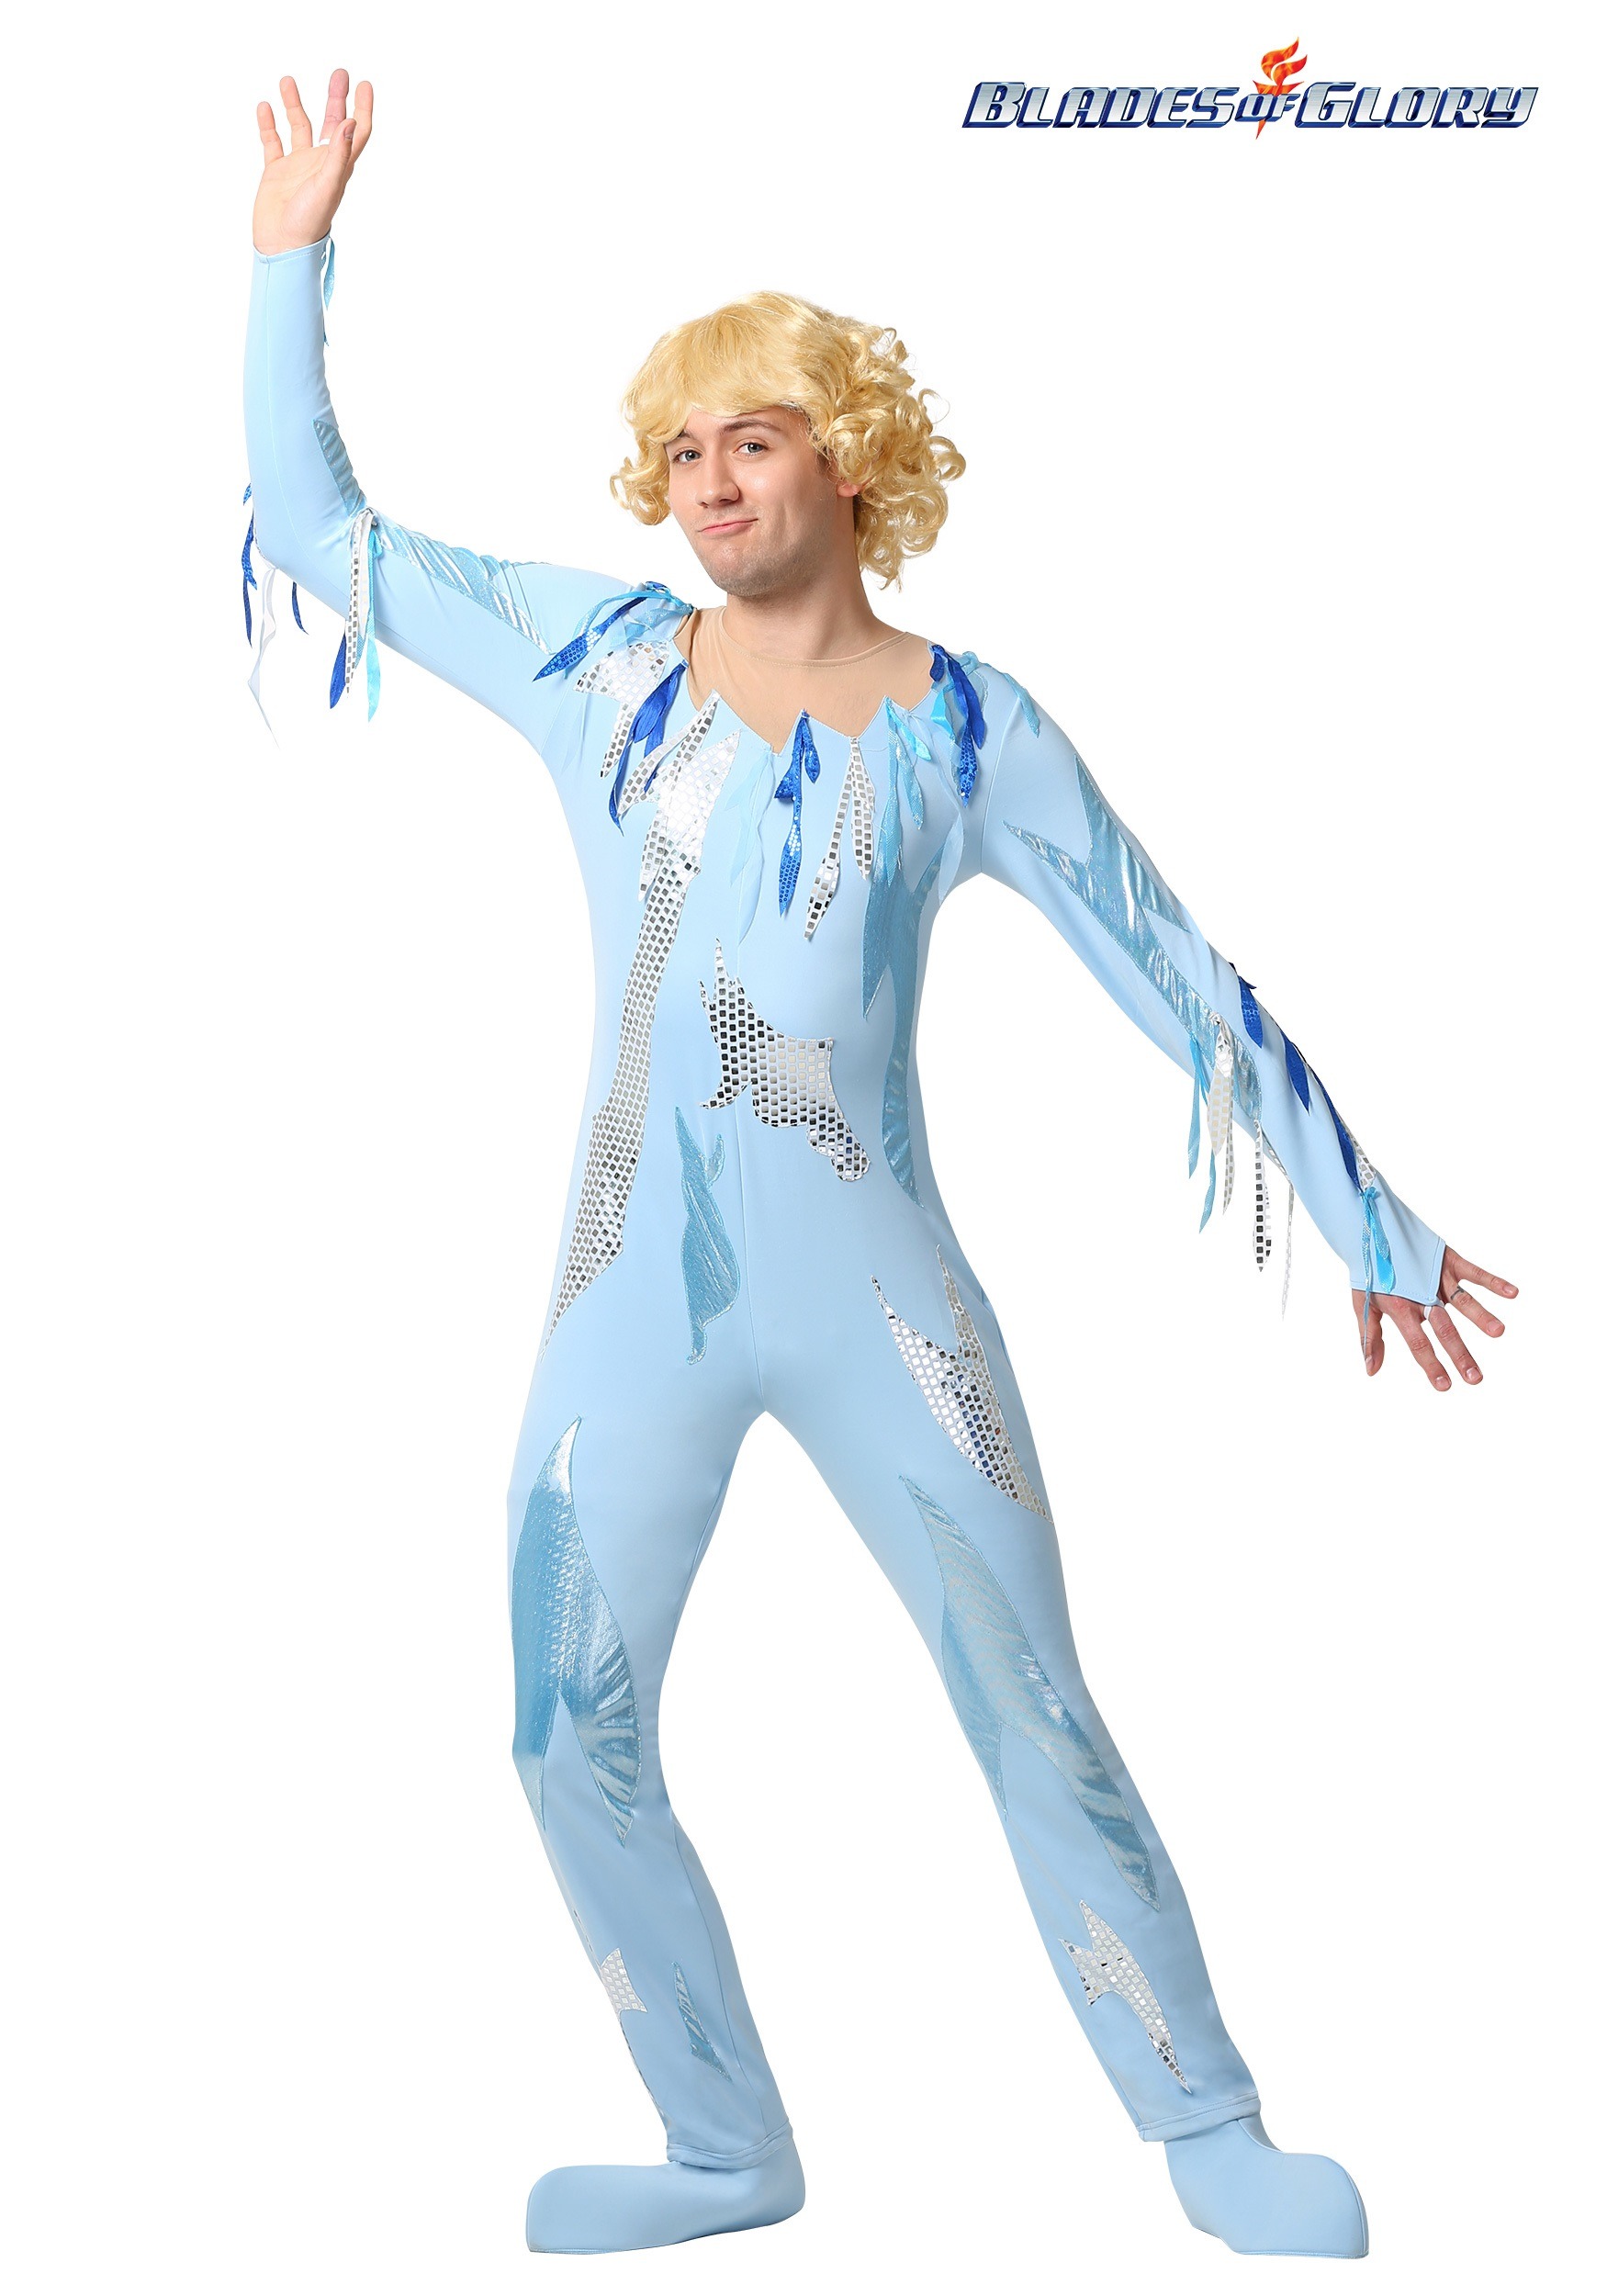 Blades Of Glory Backgrounds, Compatible - PC, Mobile, Gadgets| 1750x2500 px